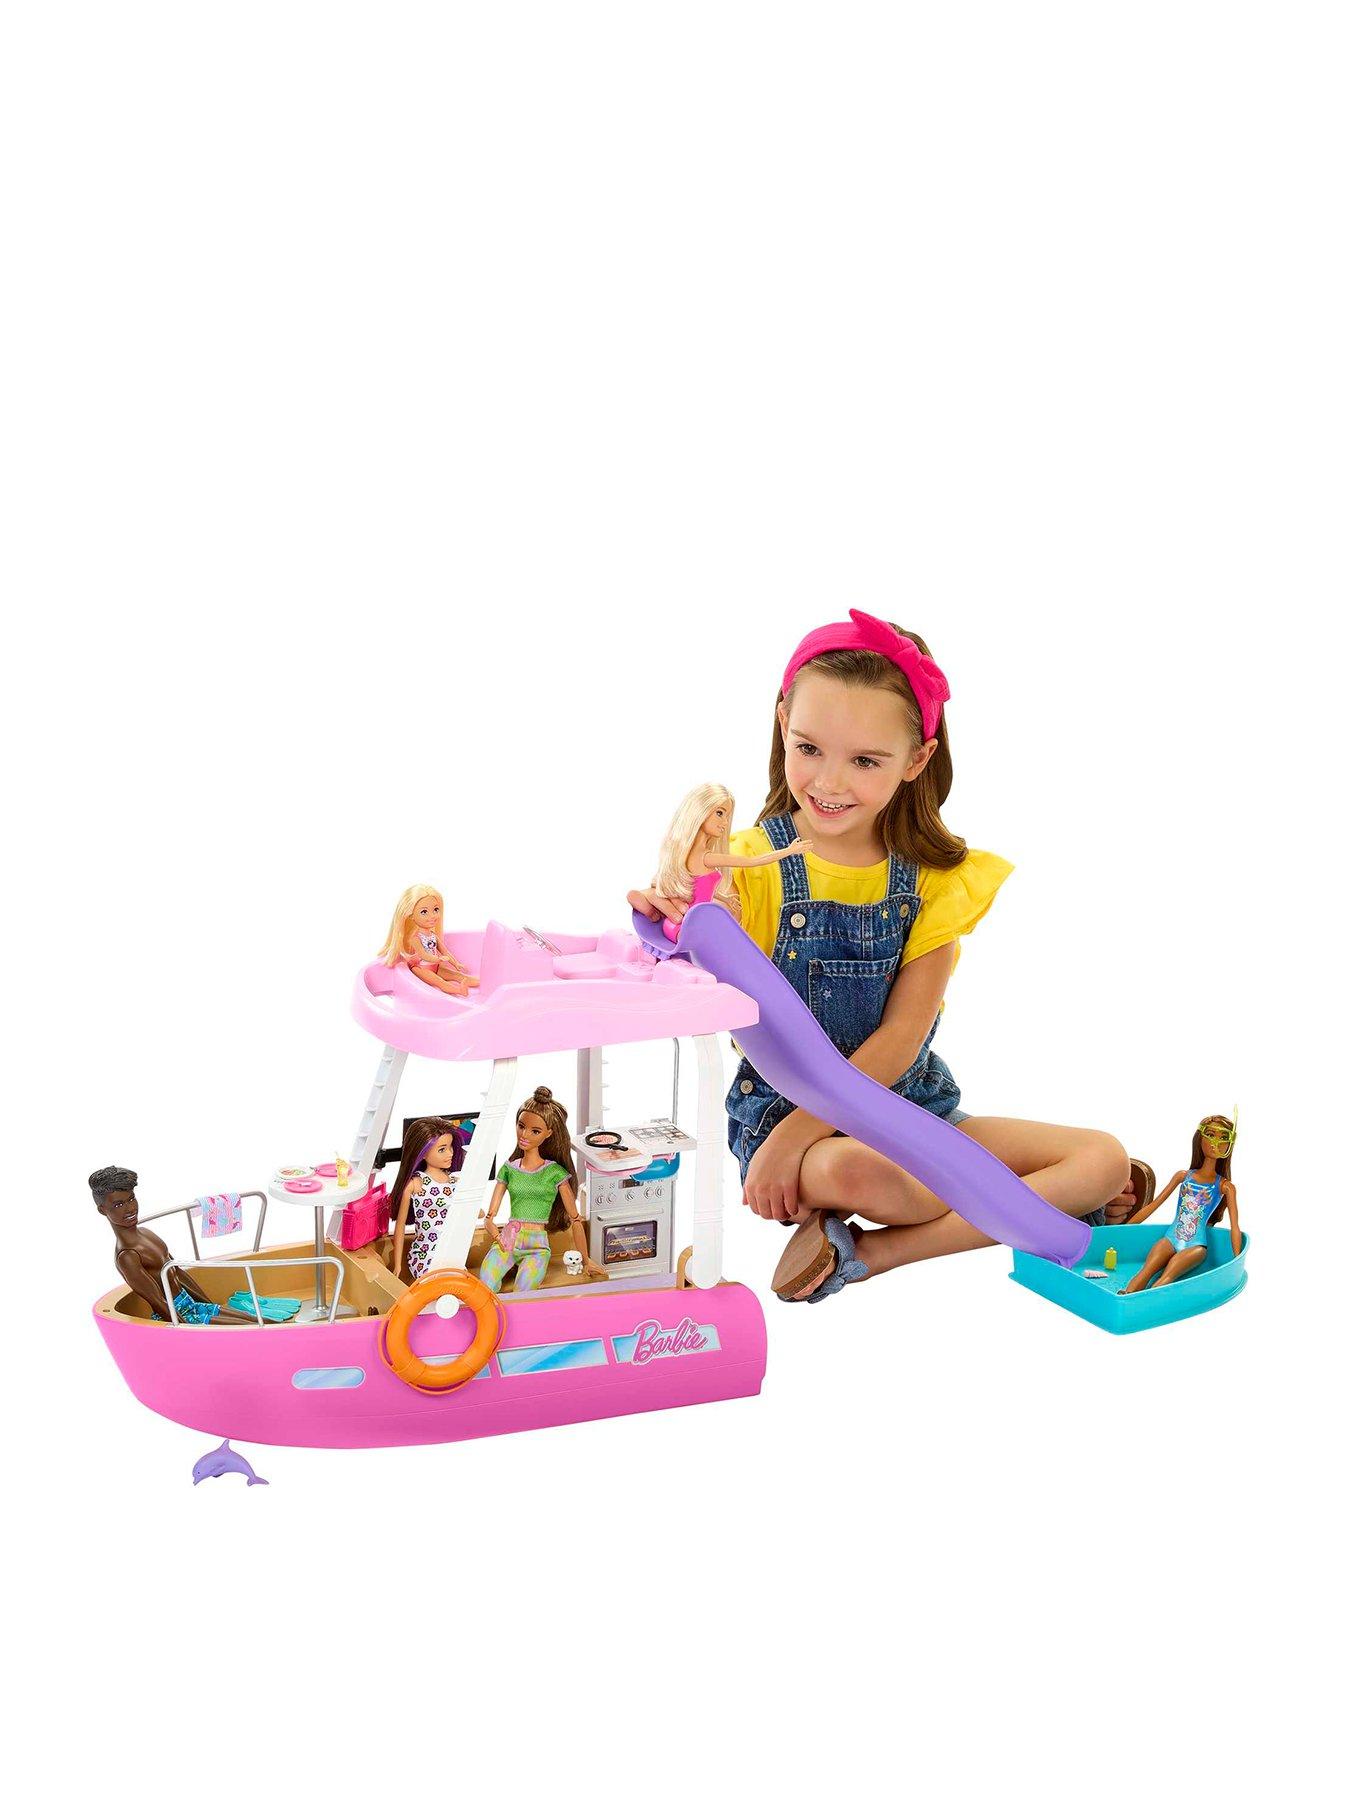 Polly Pocket Smoothie Splash Pack, Playset with 4 (3-inch) Dolls, Fashion & 20+ Outdoor Accessories